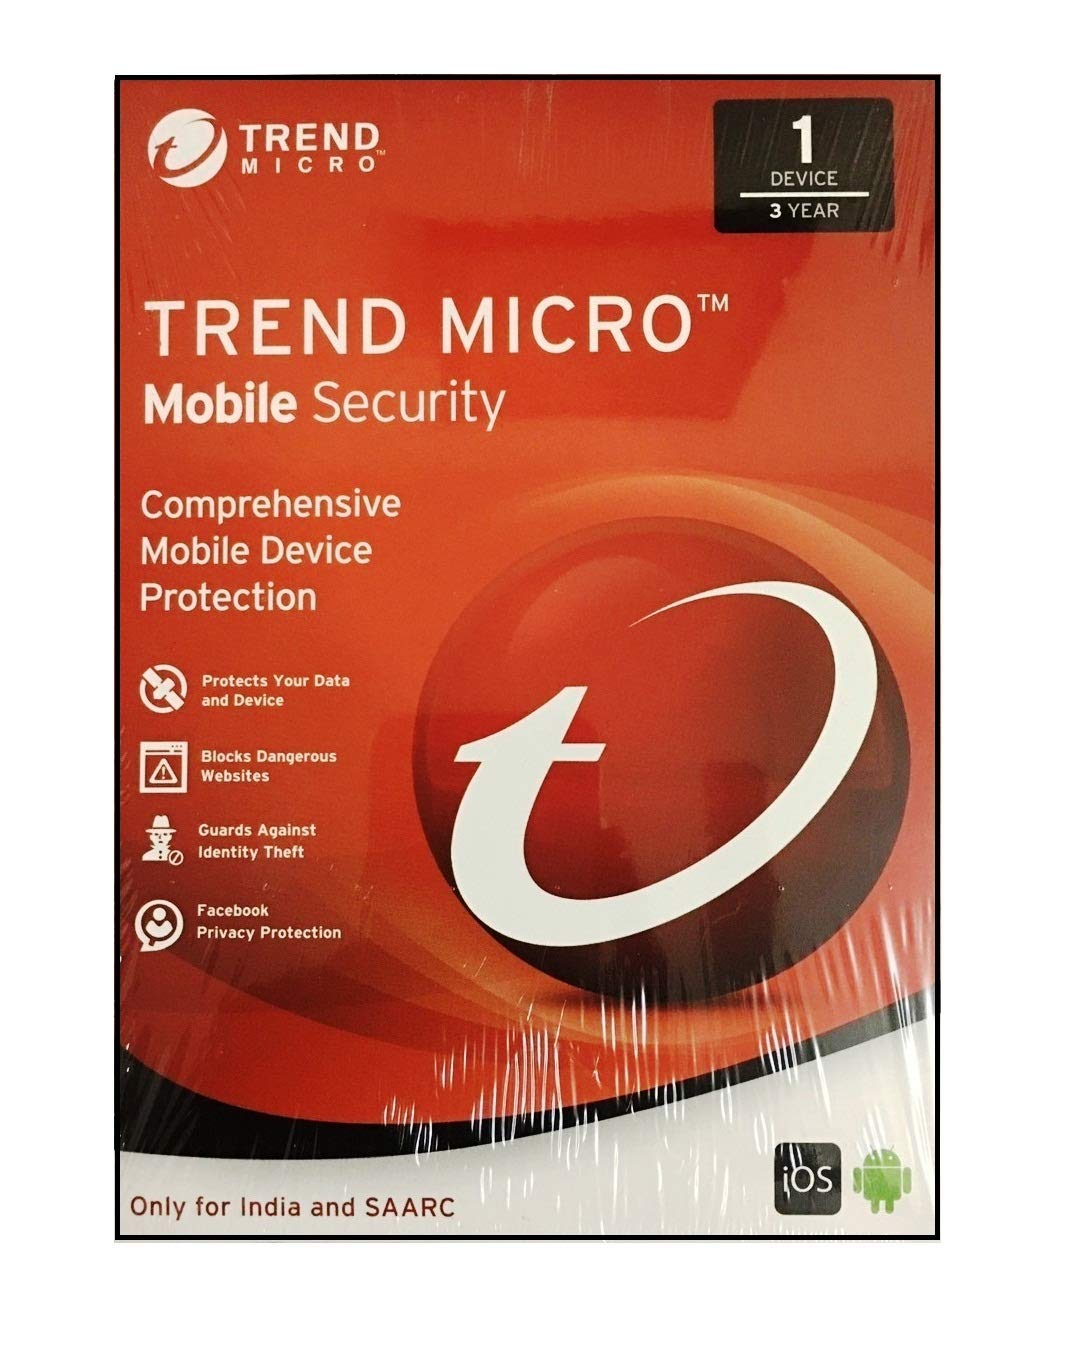 TrendMicro Mobile Security (iOS and Android)